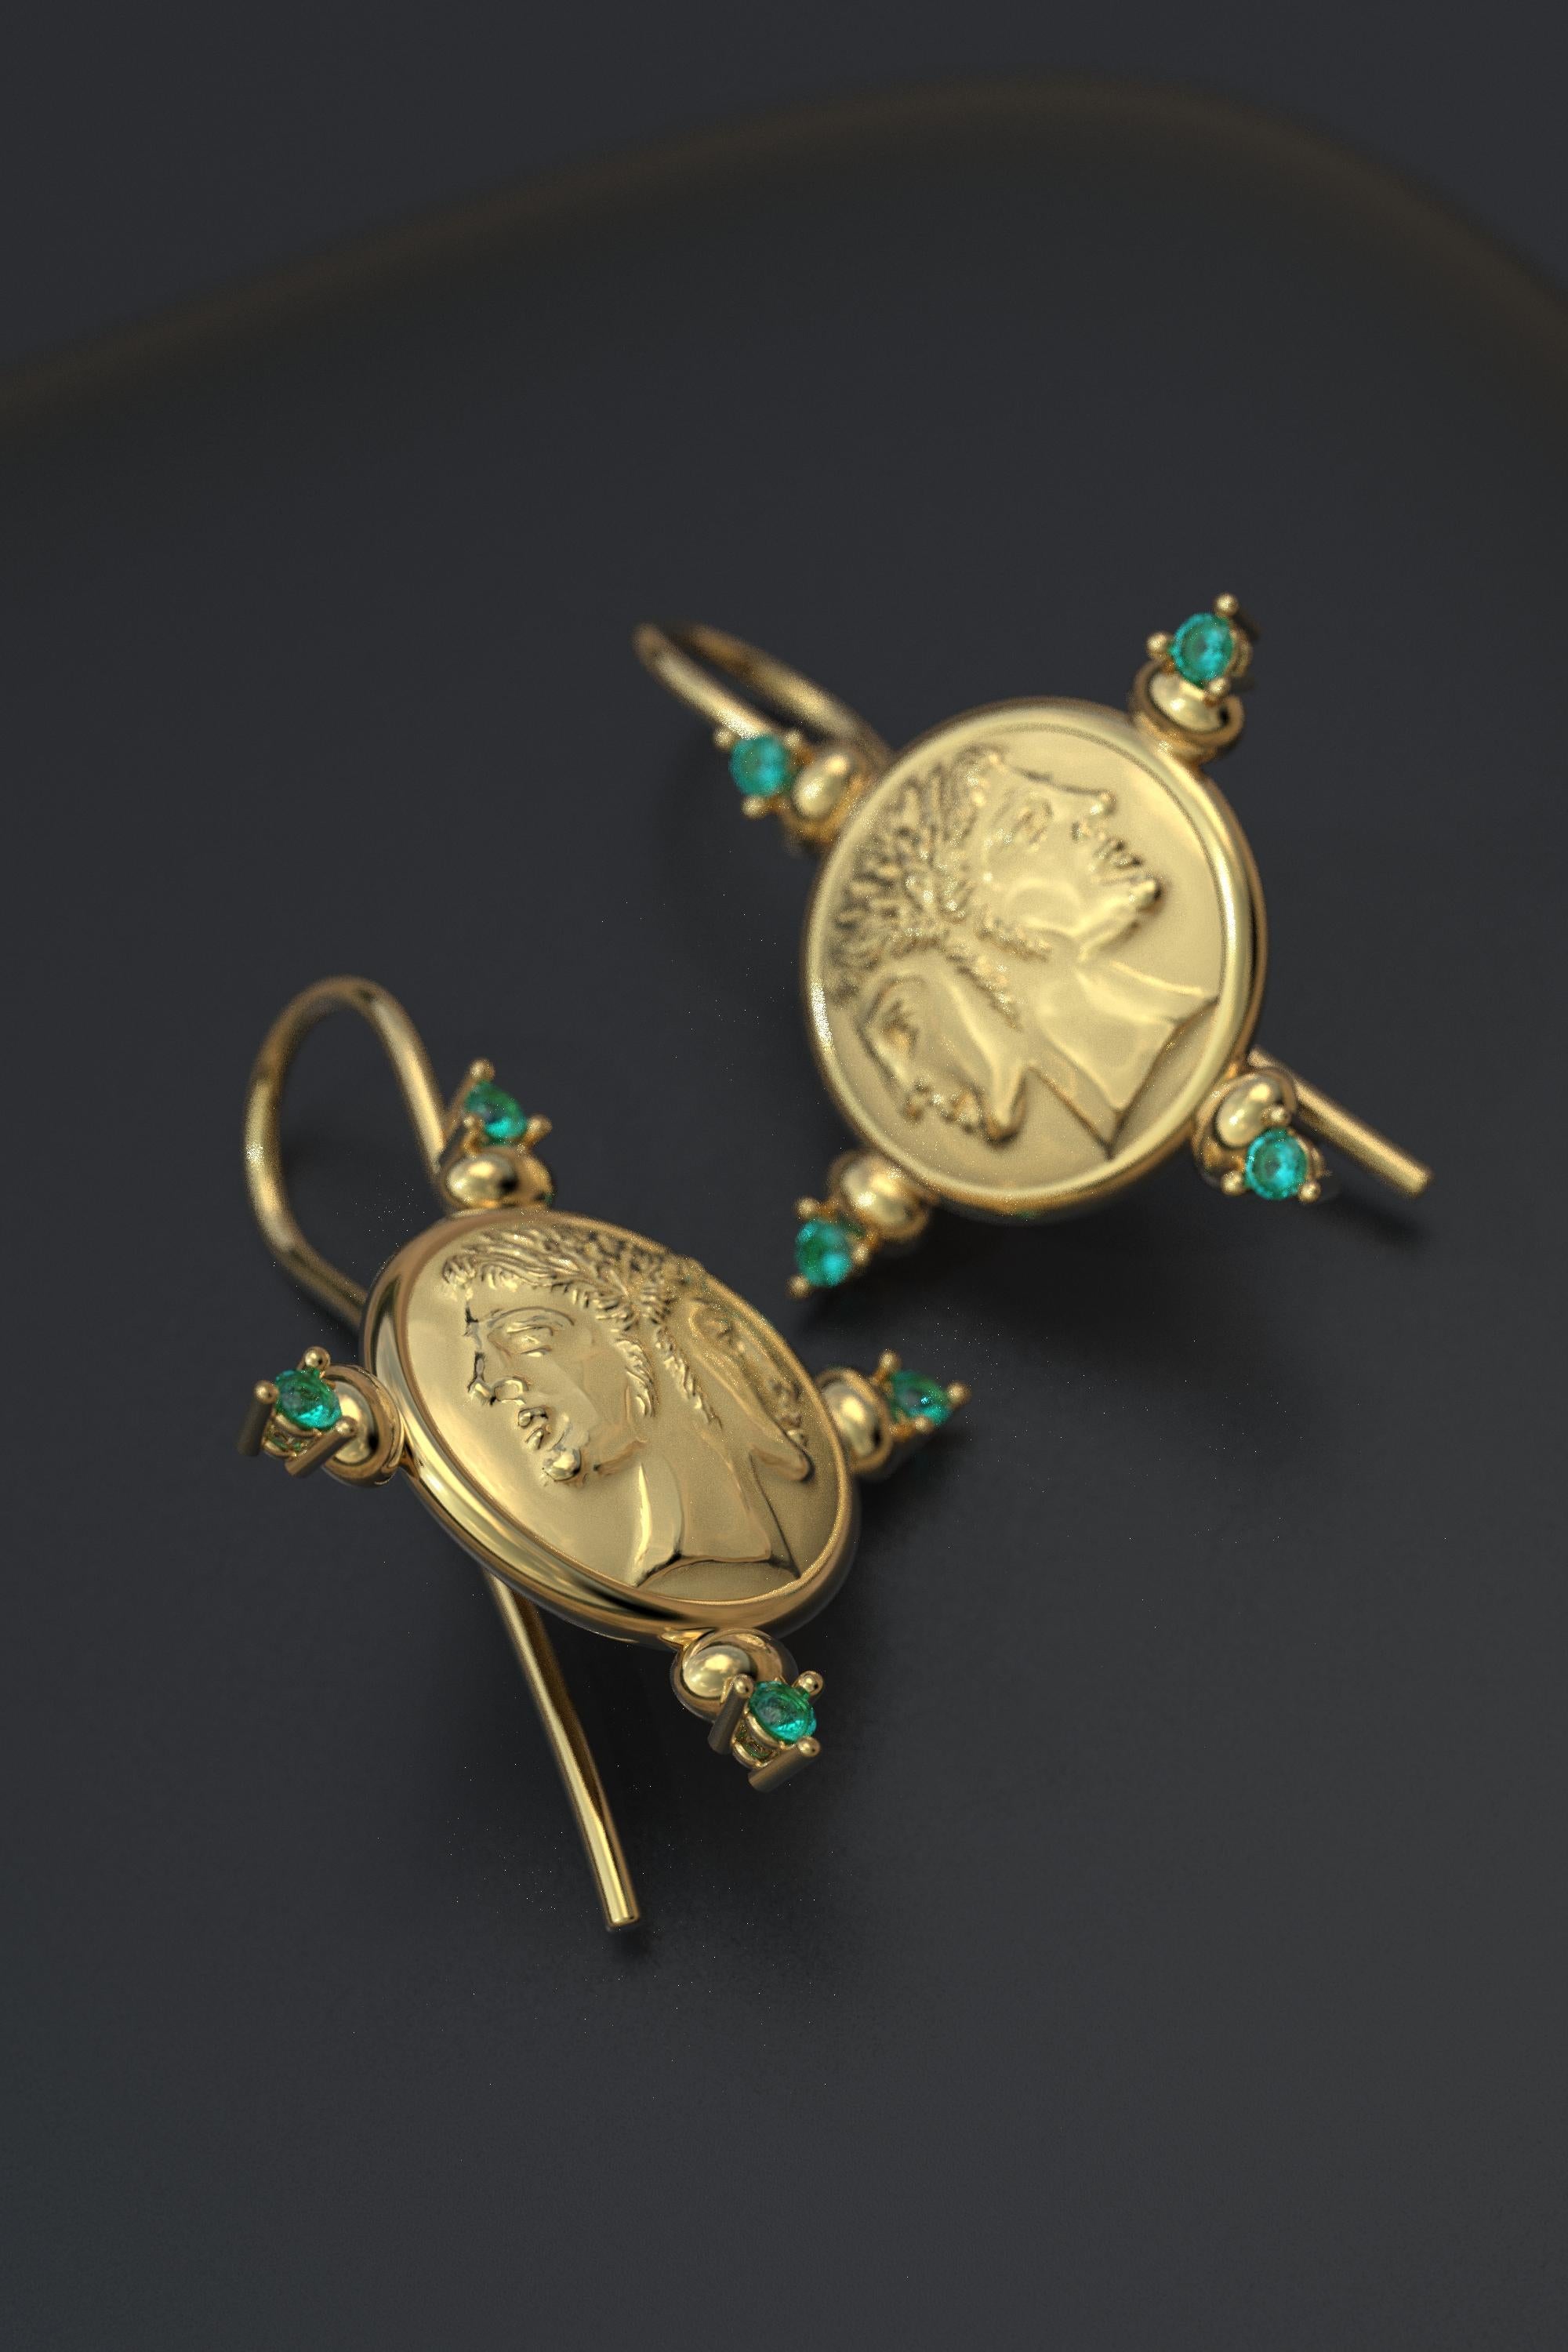 Only made to order.
Transport yourself to the captivating era of ancient Rome with our stunning 18k Gold Earrings, meticulously handcrafted in Italy by Oltremare Gioielli. These exquisite earrings pay homage to the grandeur of Roman aesthetics,